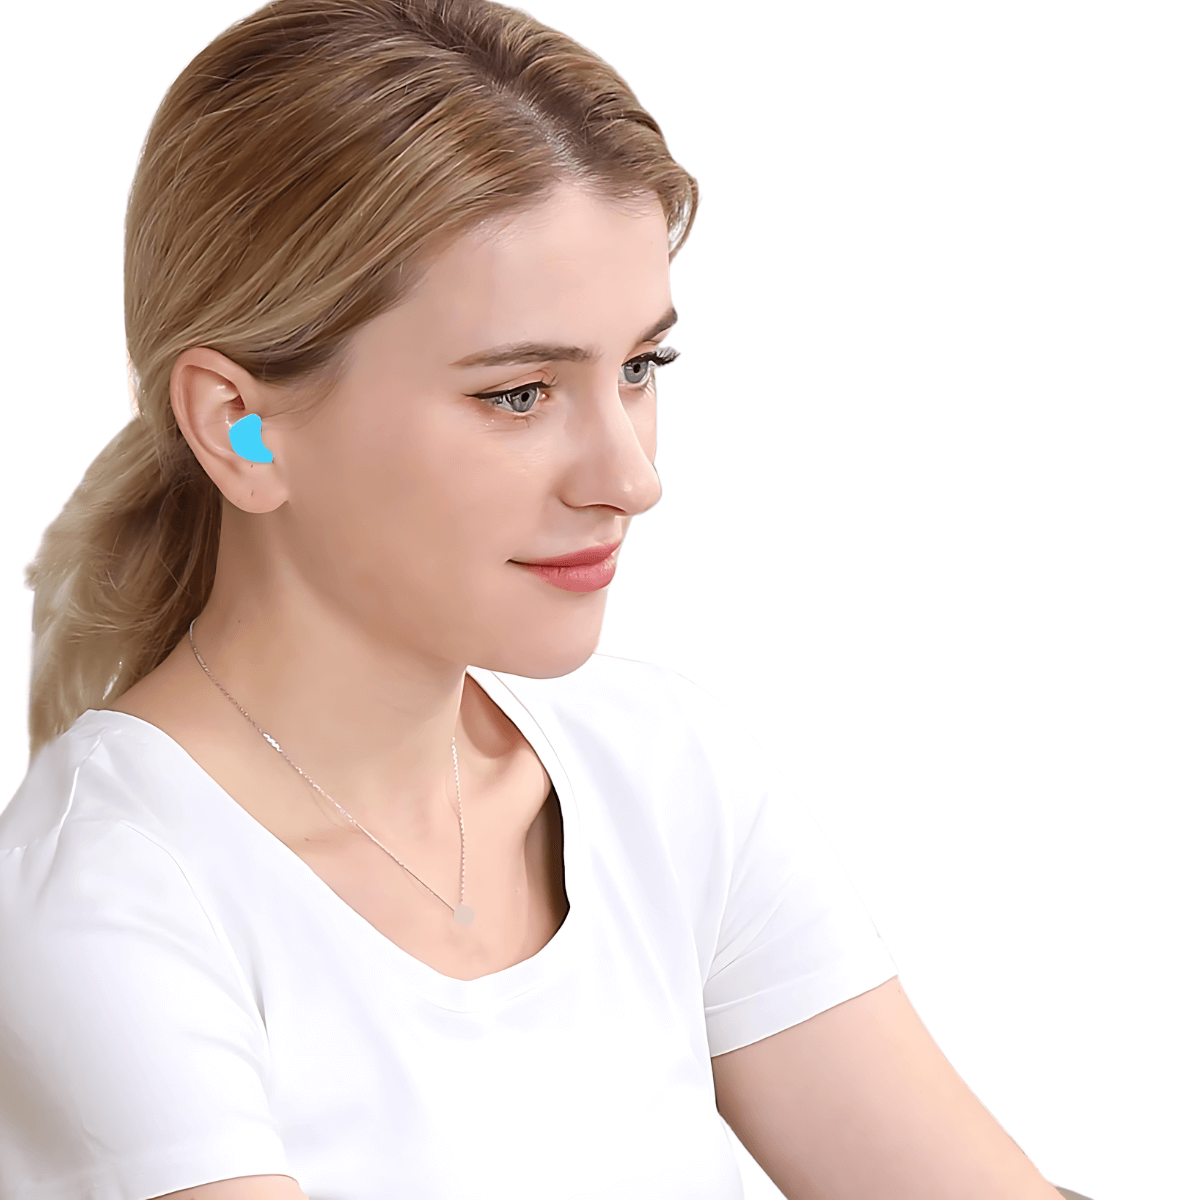 DREAMPLUNGE Mouldable Ear Plugs